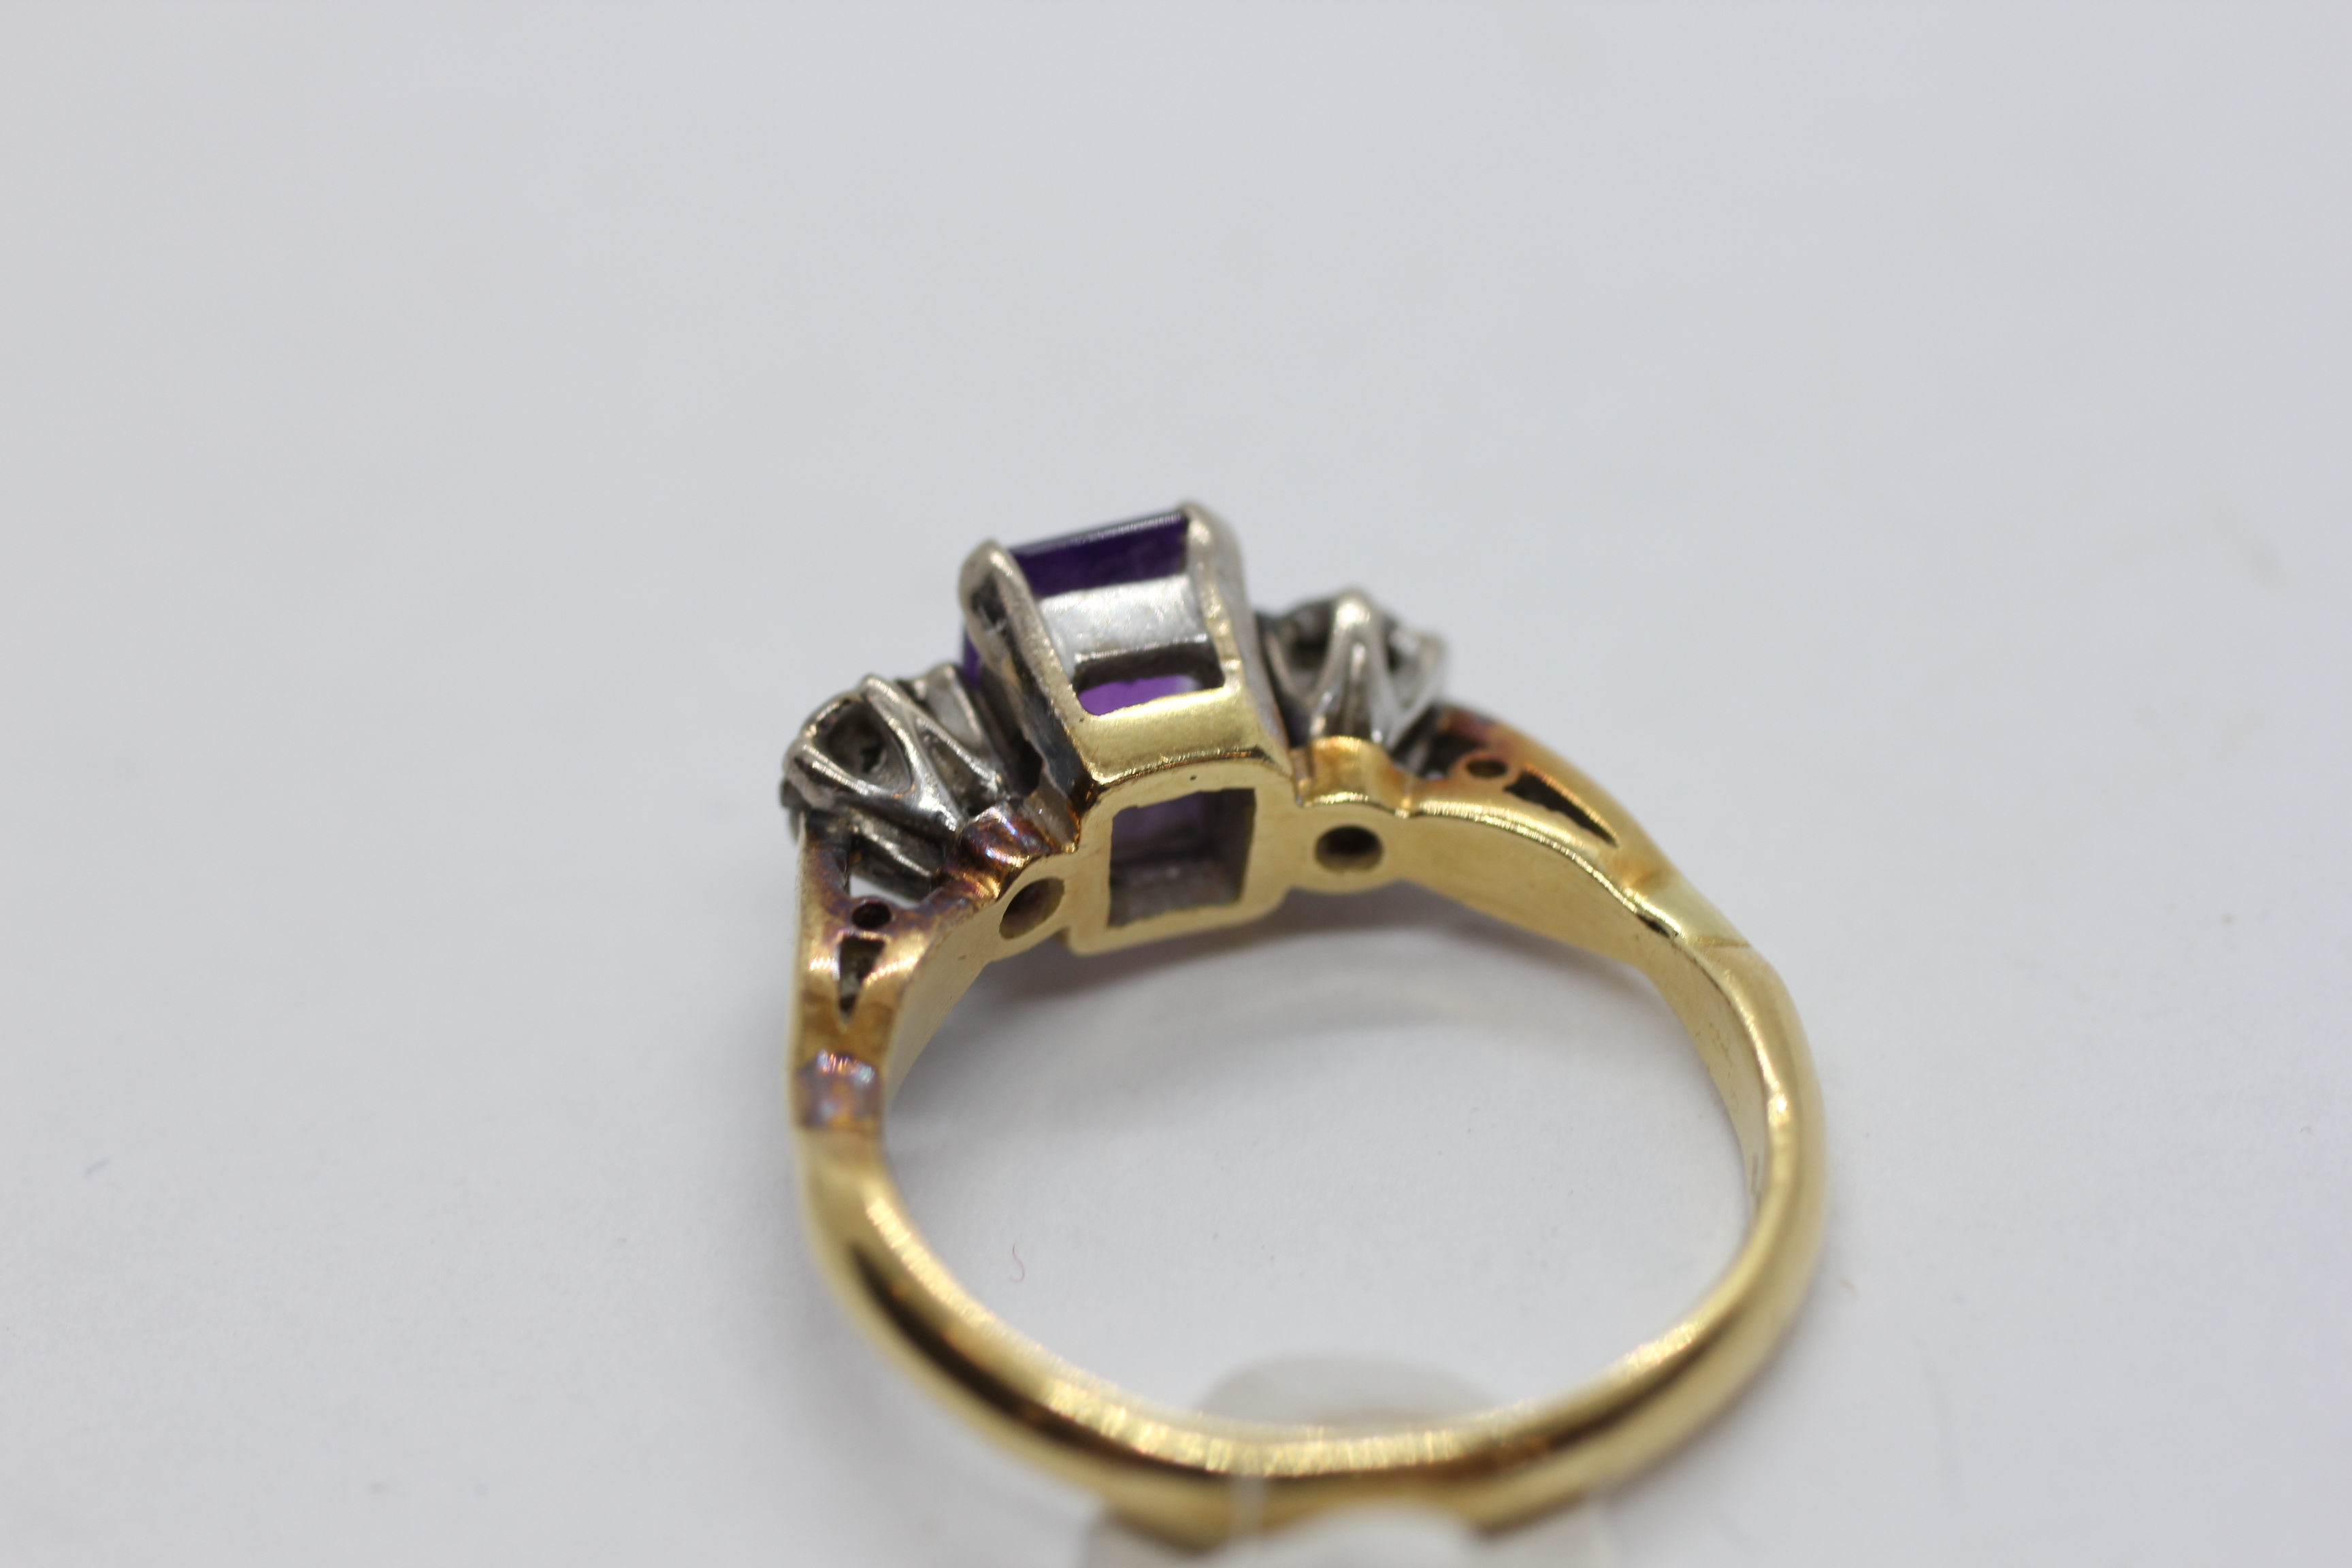 AN 18CT GOLD RING SET WITH A CENTRAL EMERALD CUT AMETHYST AND A DIAMOND EITHER SIDE. - Image 7 of 7